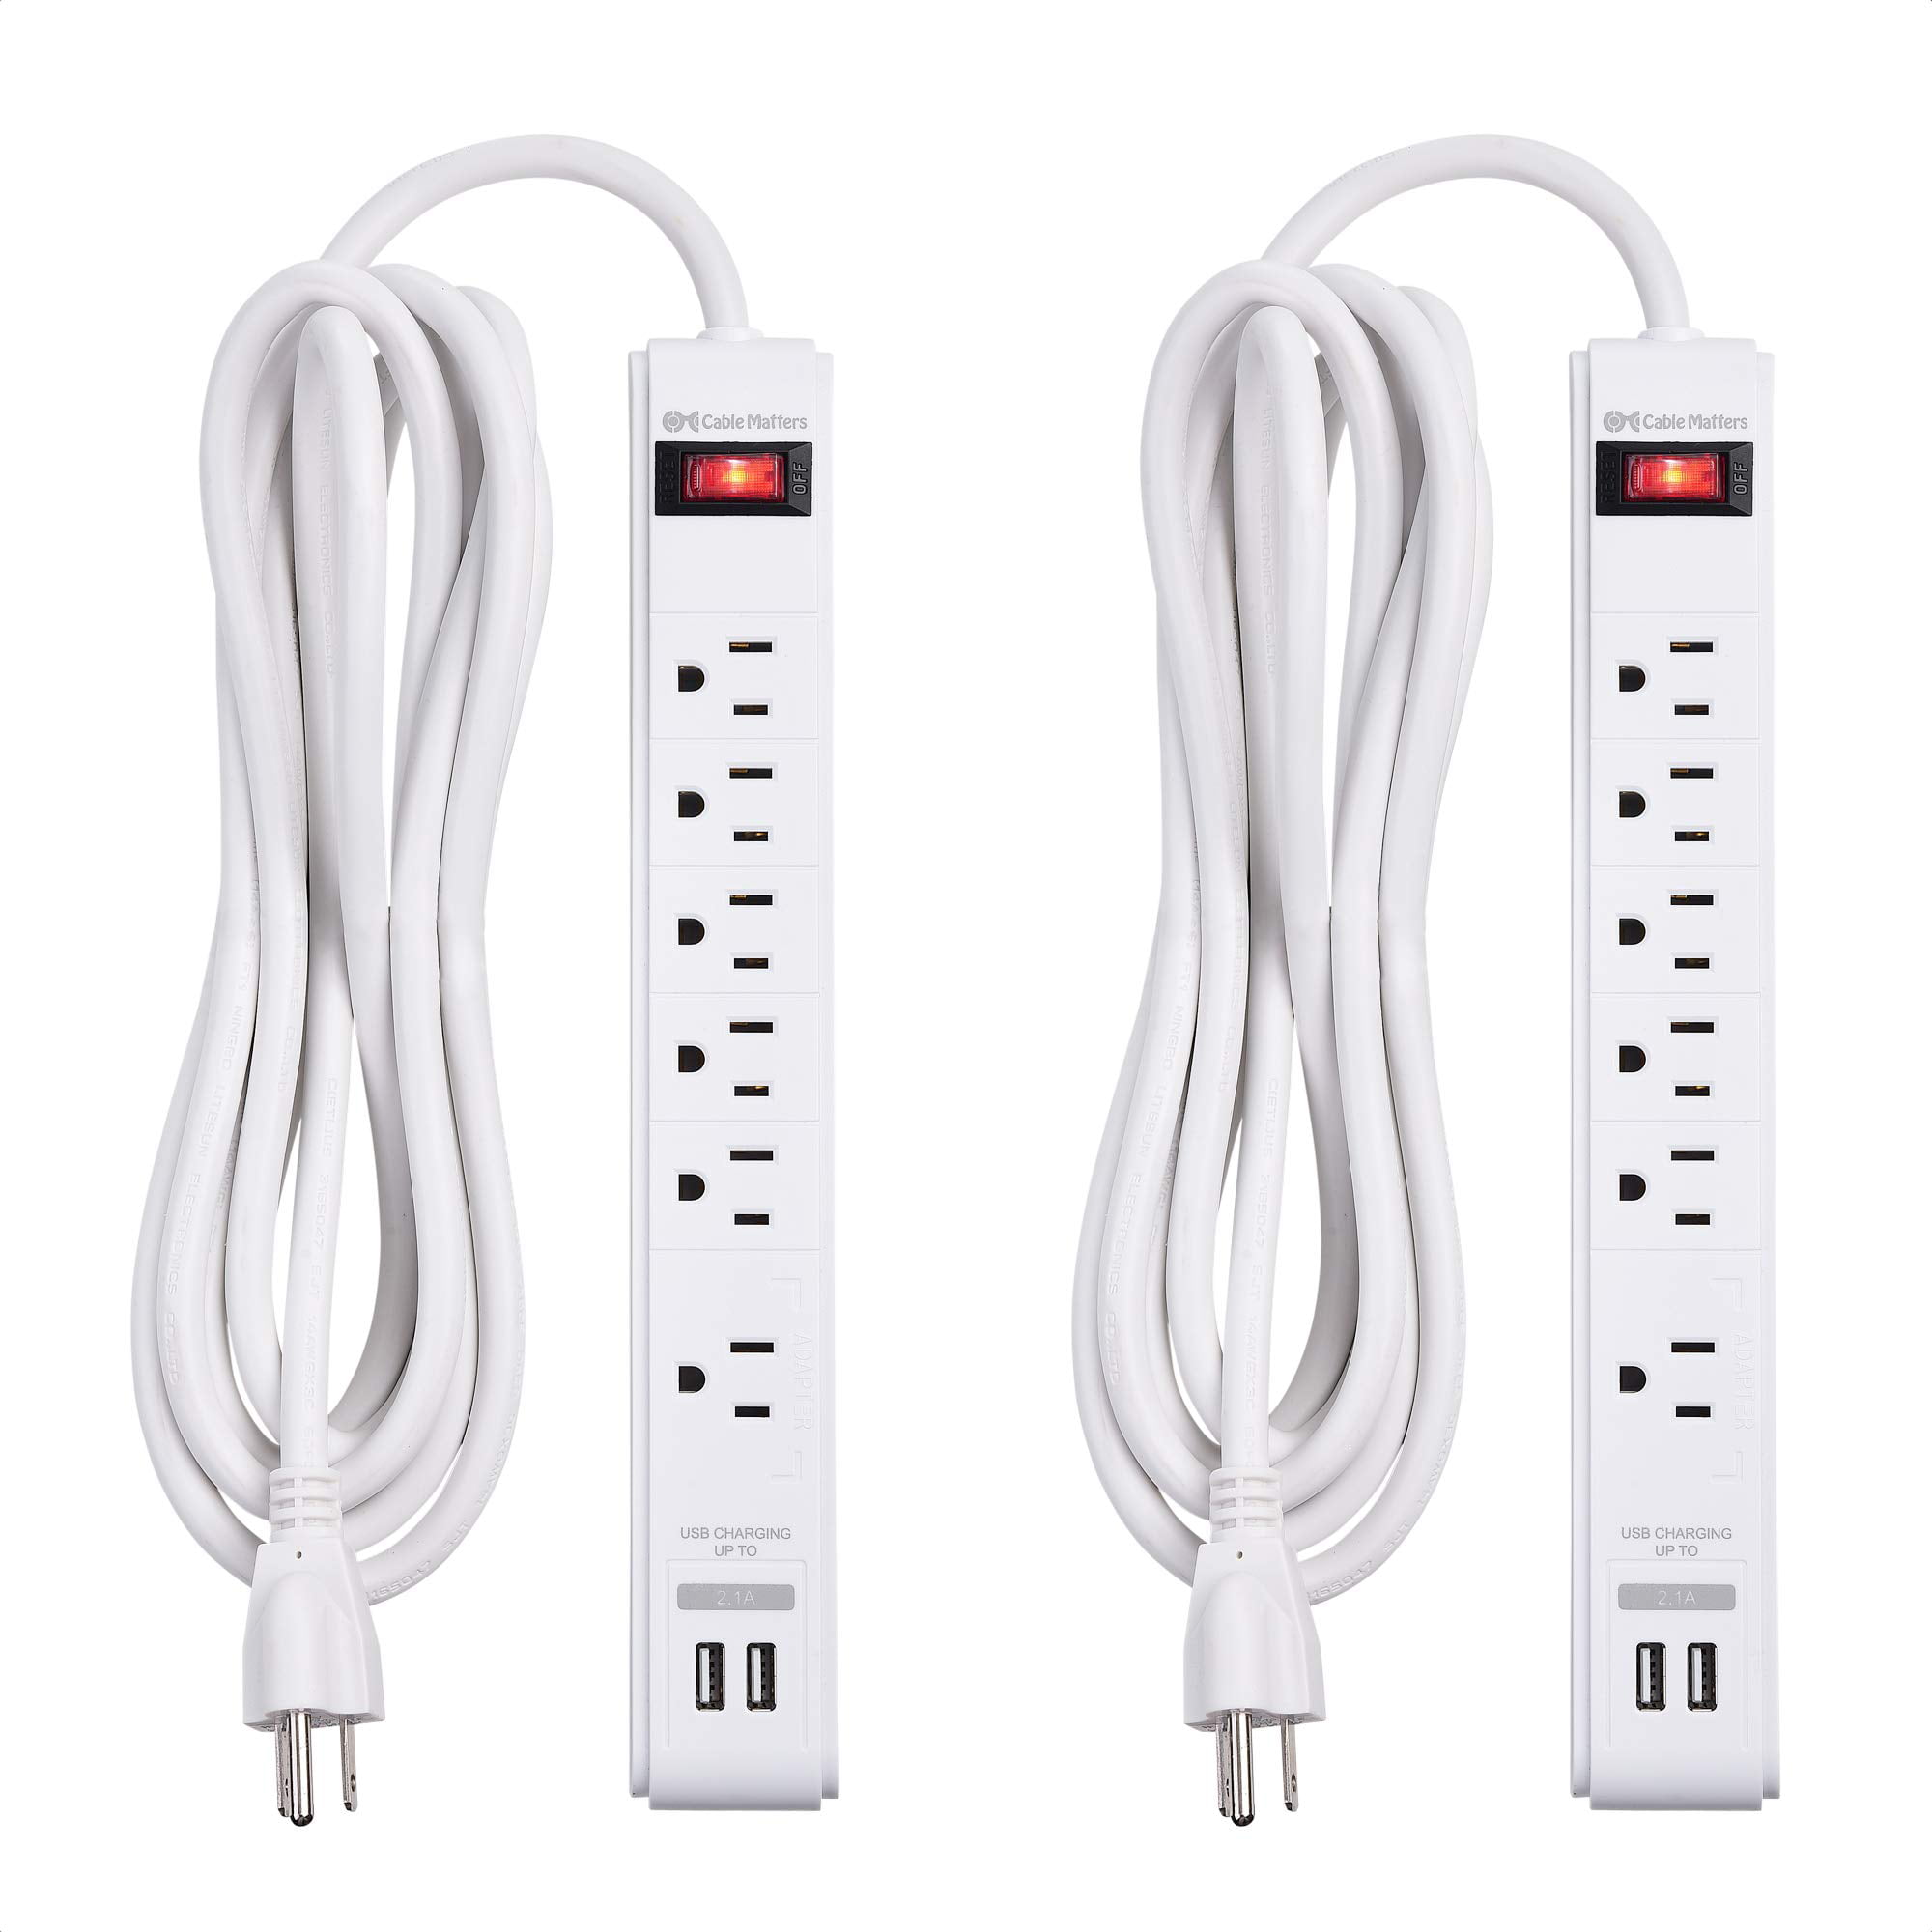 2-Pack 6 Outlet Surge Protector Power Strip with USB Charging Cable Matters 